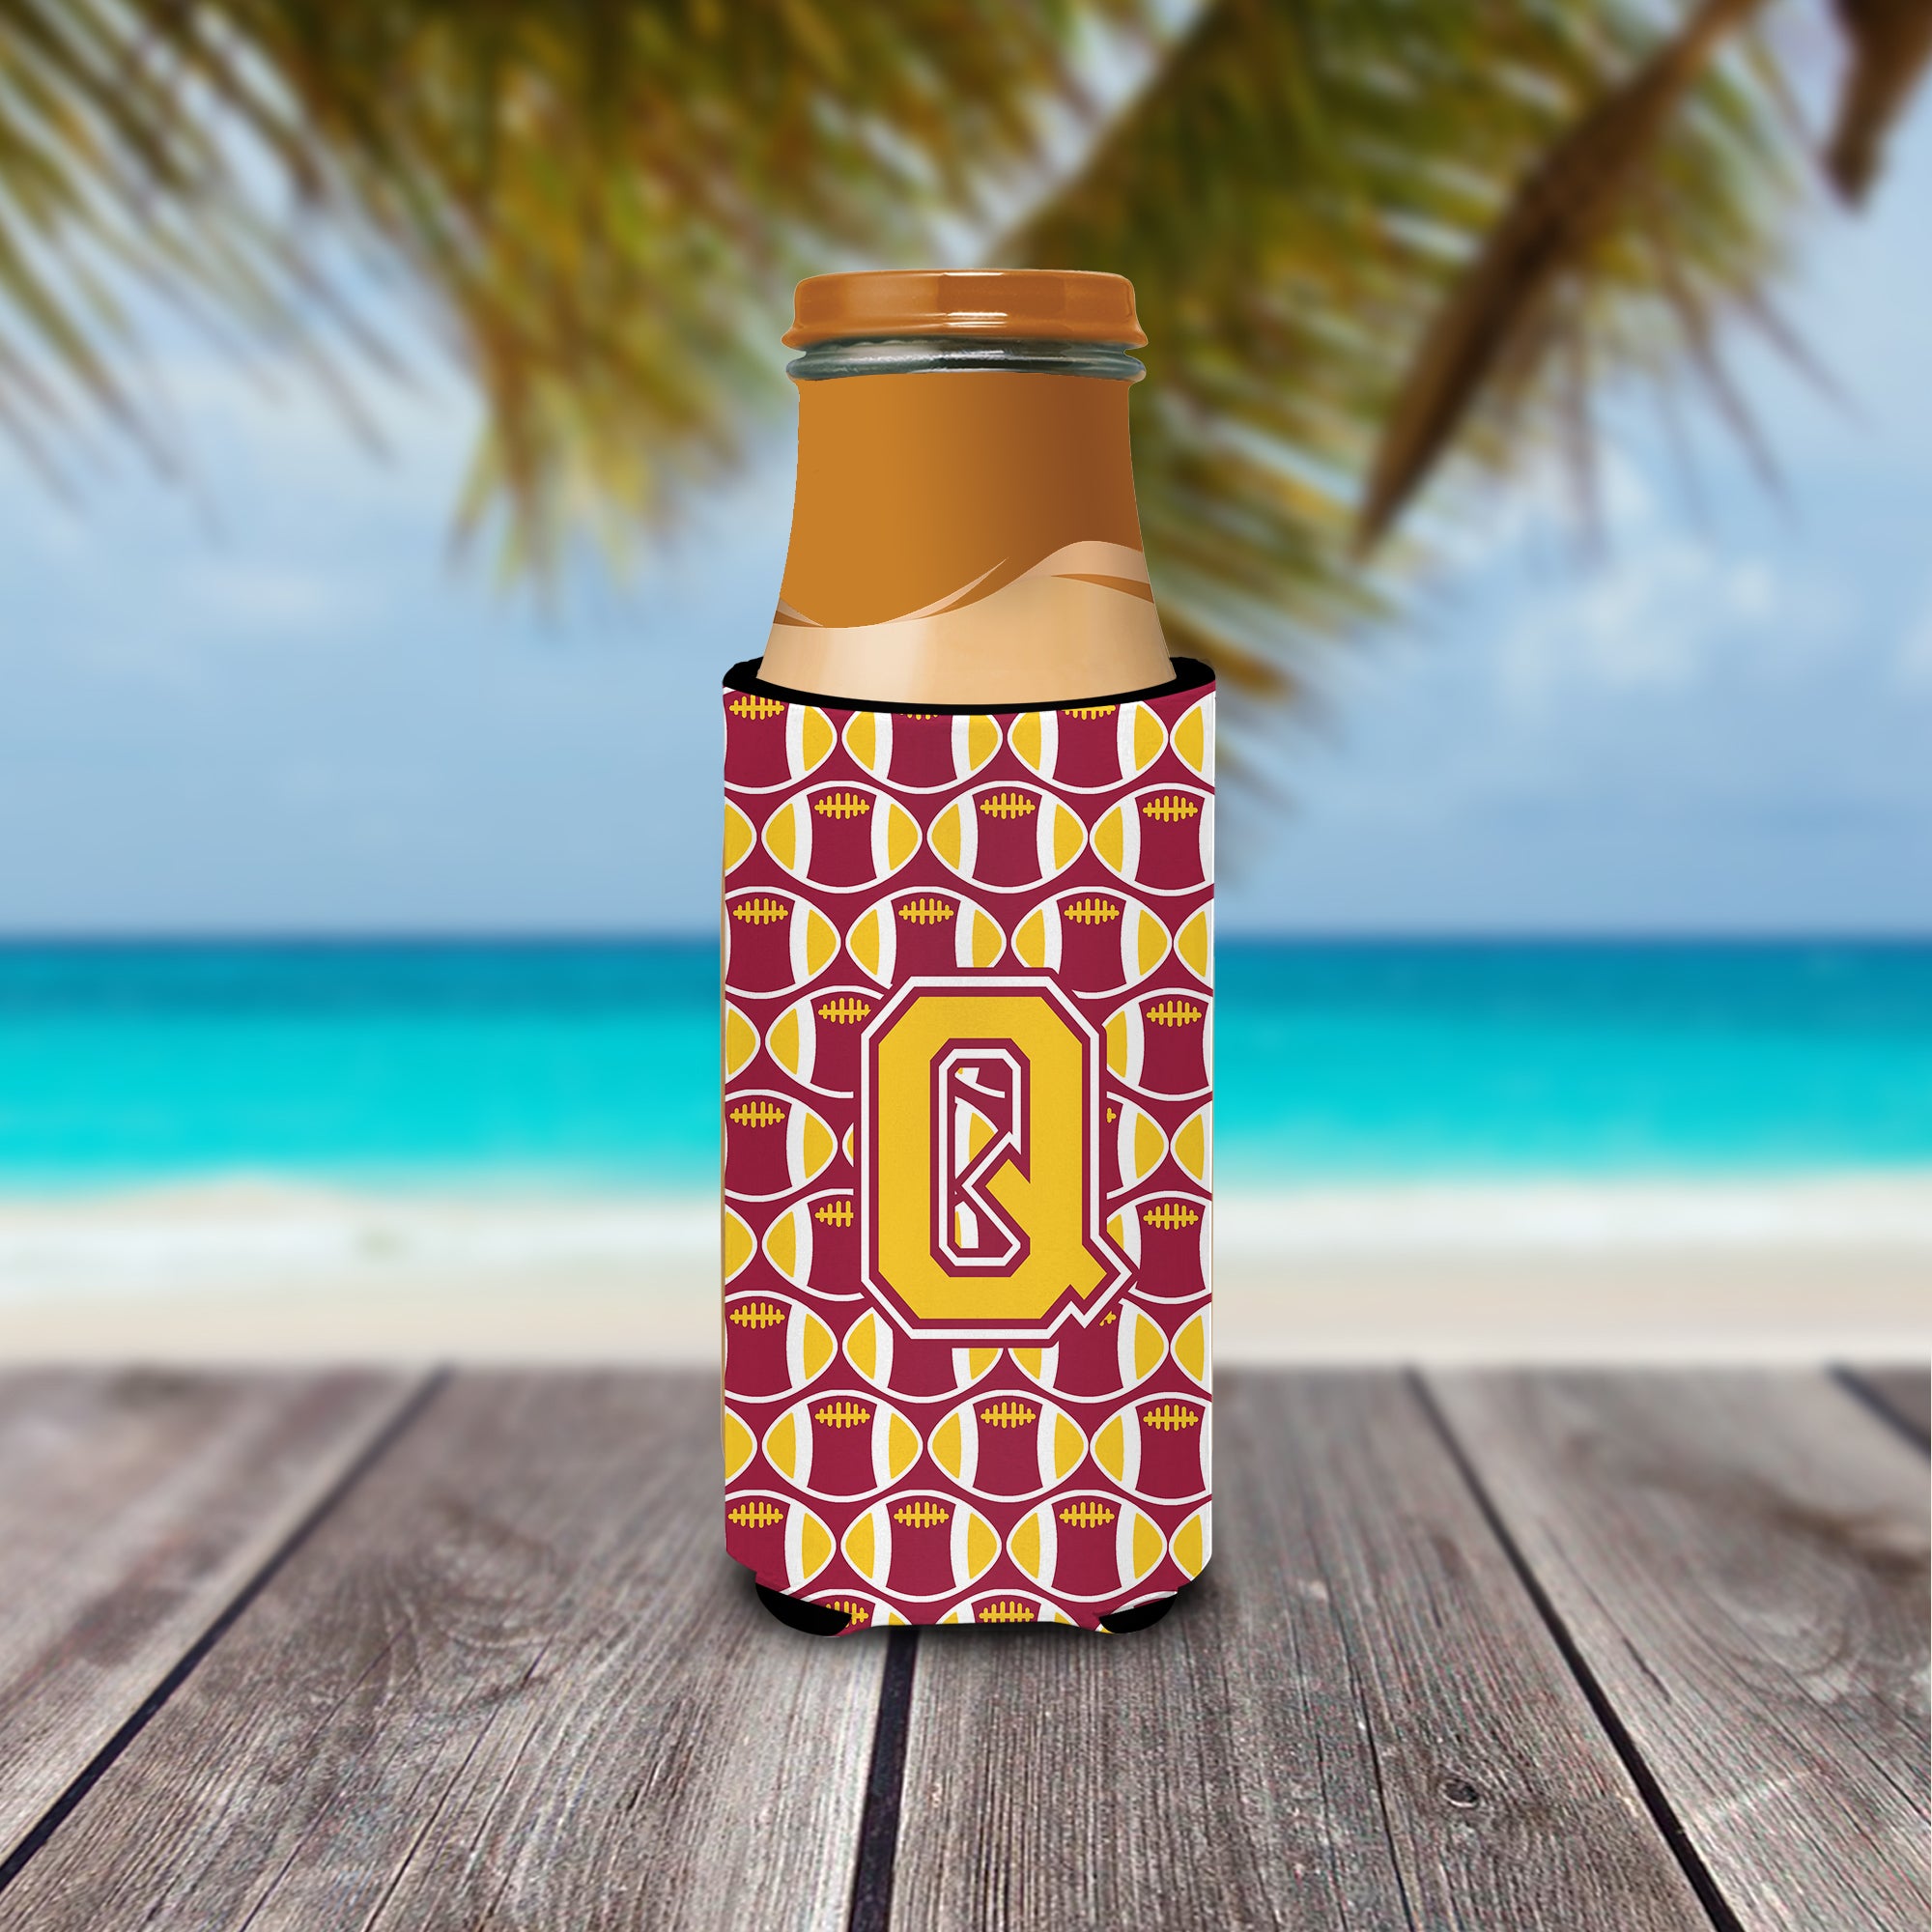 Letter Q Football Maroon and Gold Ultra Beverage Insulators for slim cans CJ1081-QMUK.